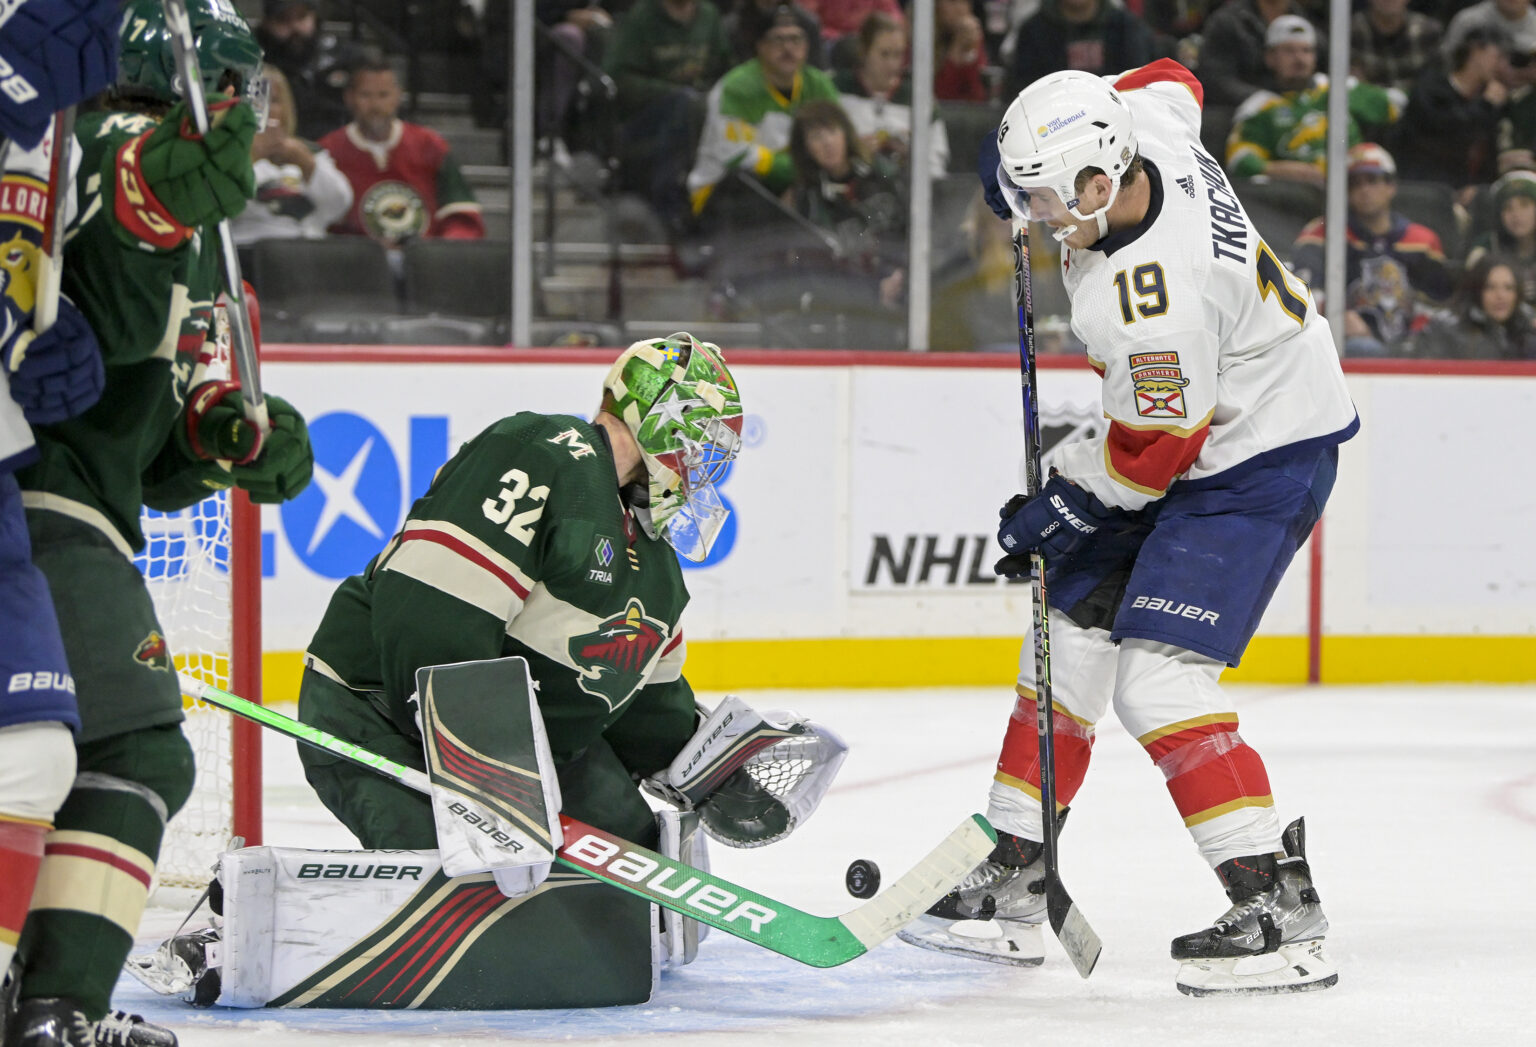 Minnesota Wild game today; TV Schedule, Channel and more